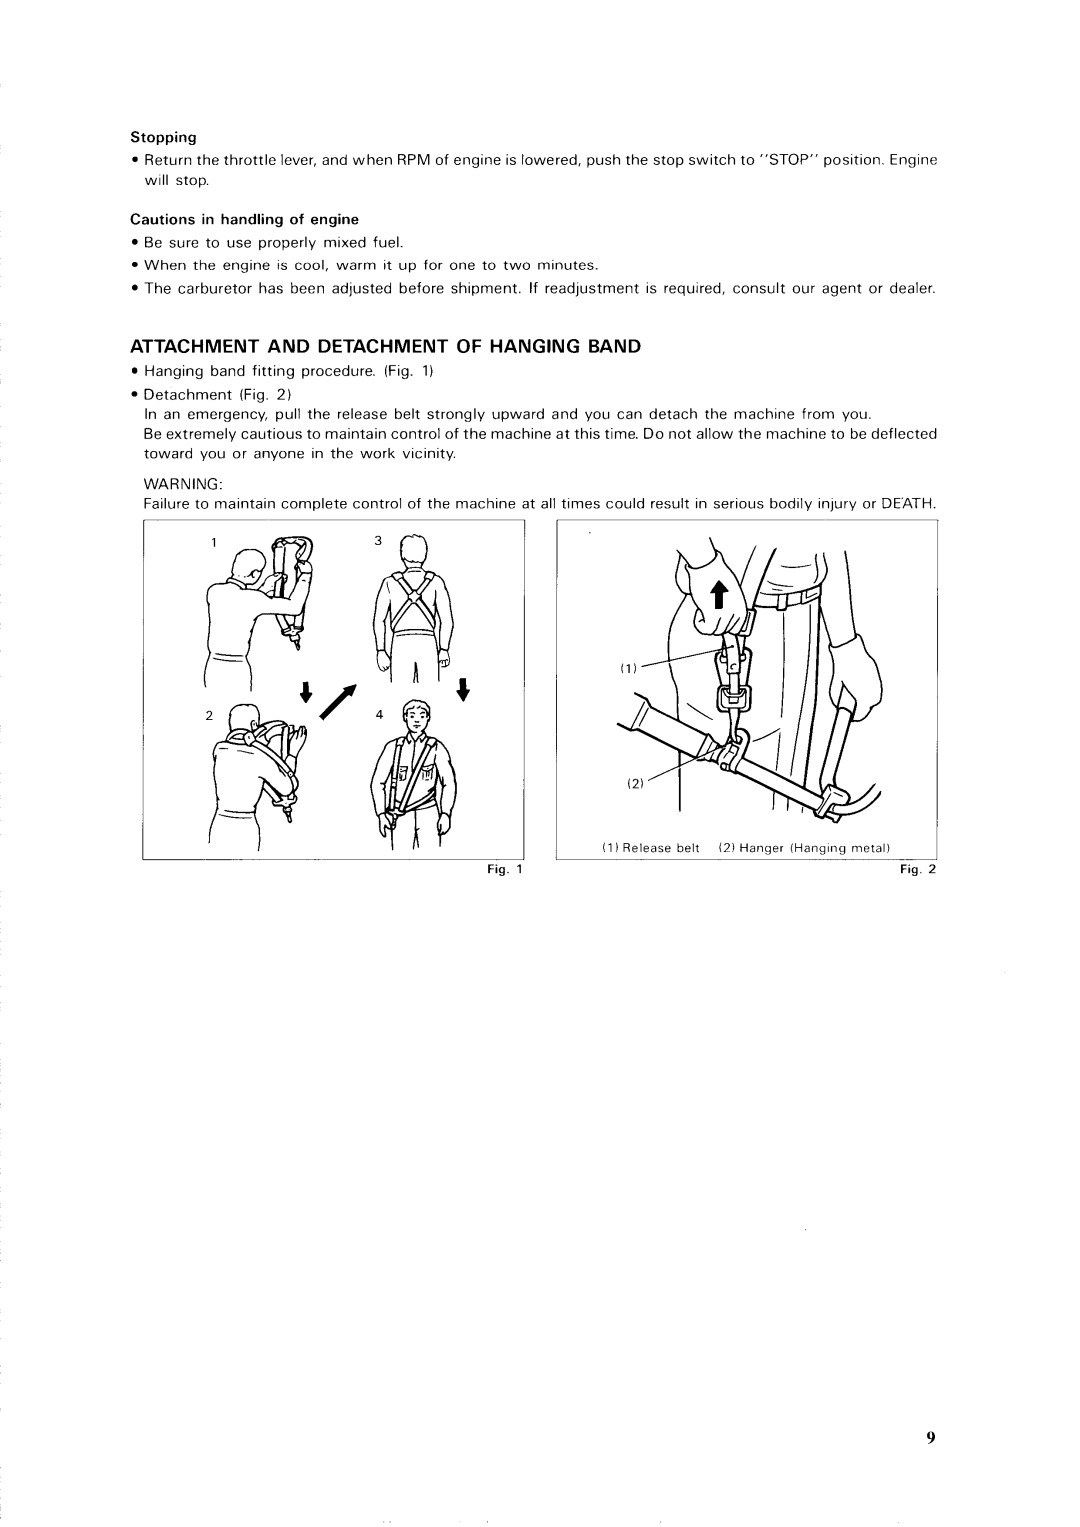 Makita RBC261, RBC230, RBC311, RBC310 Attachment And Detachment Of Hanging Band, Stopping, Cautions in handling of engine 